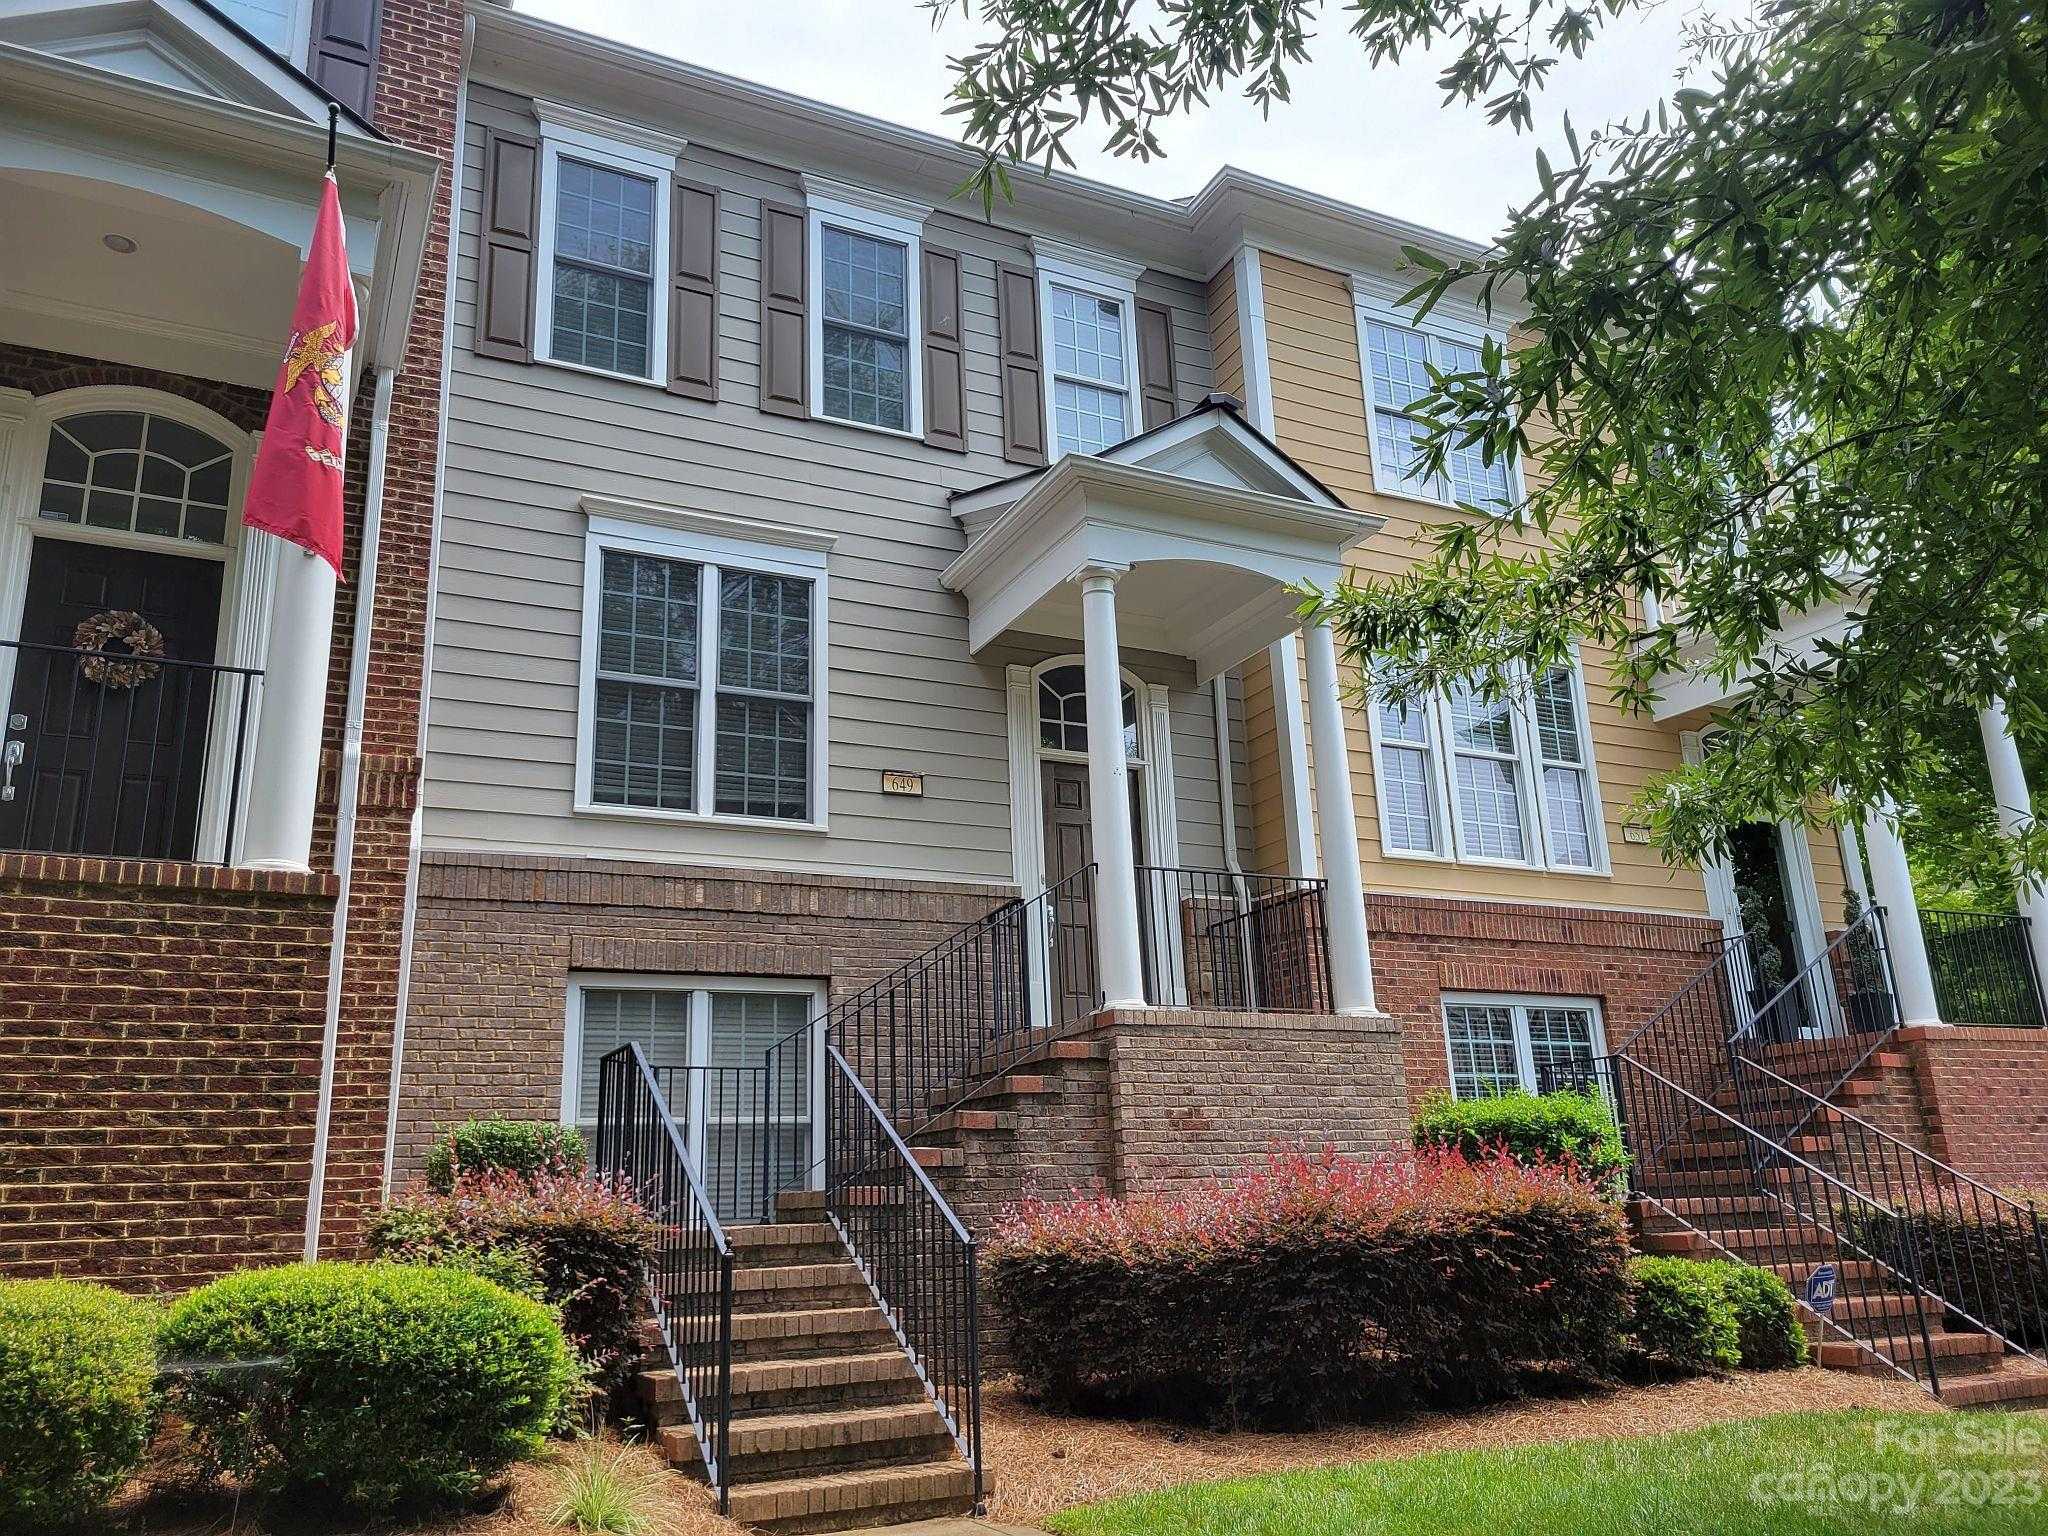 View Fort Mill, SC 29708 townhome